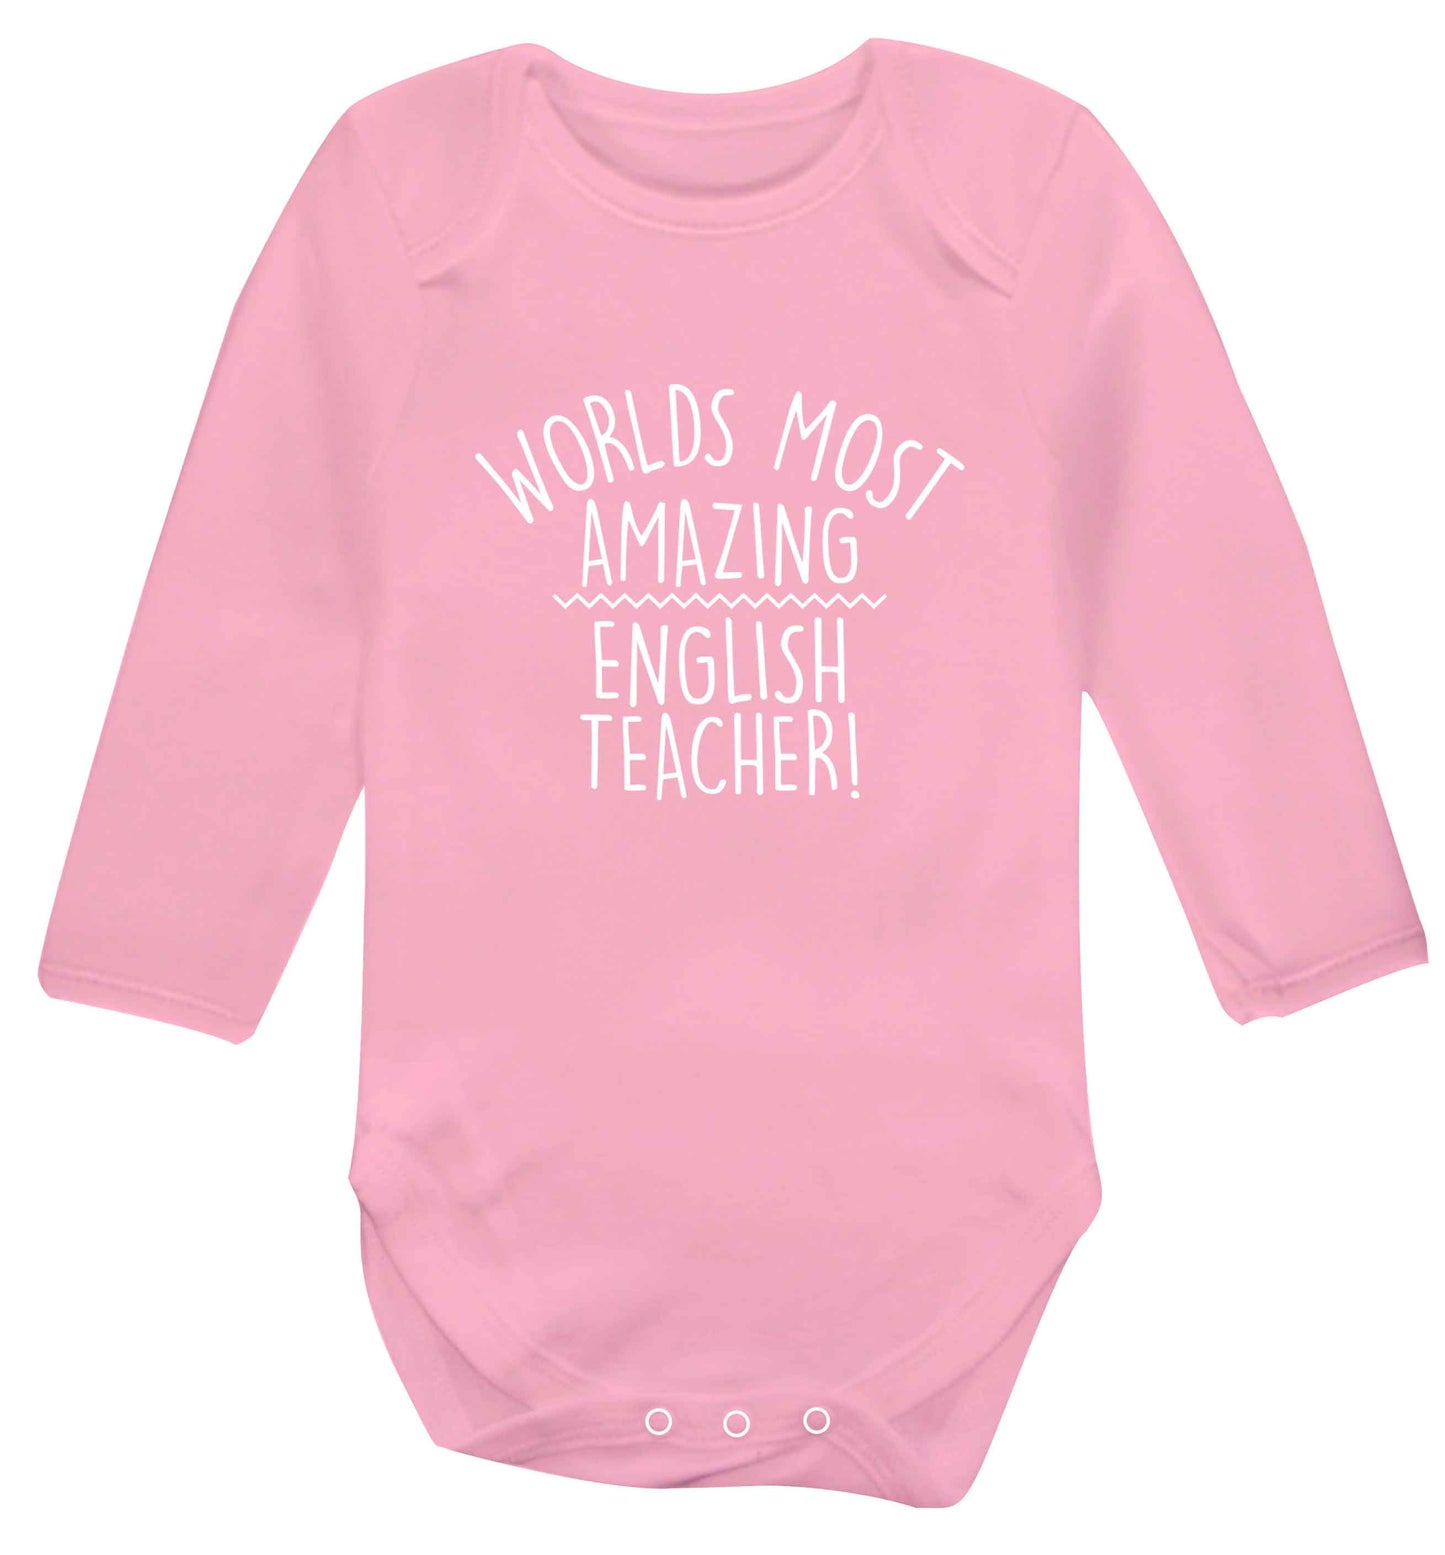 Worlds most amazing English teacher baby vest long sleeved pale pink 6-12 months